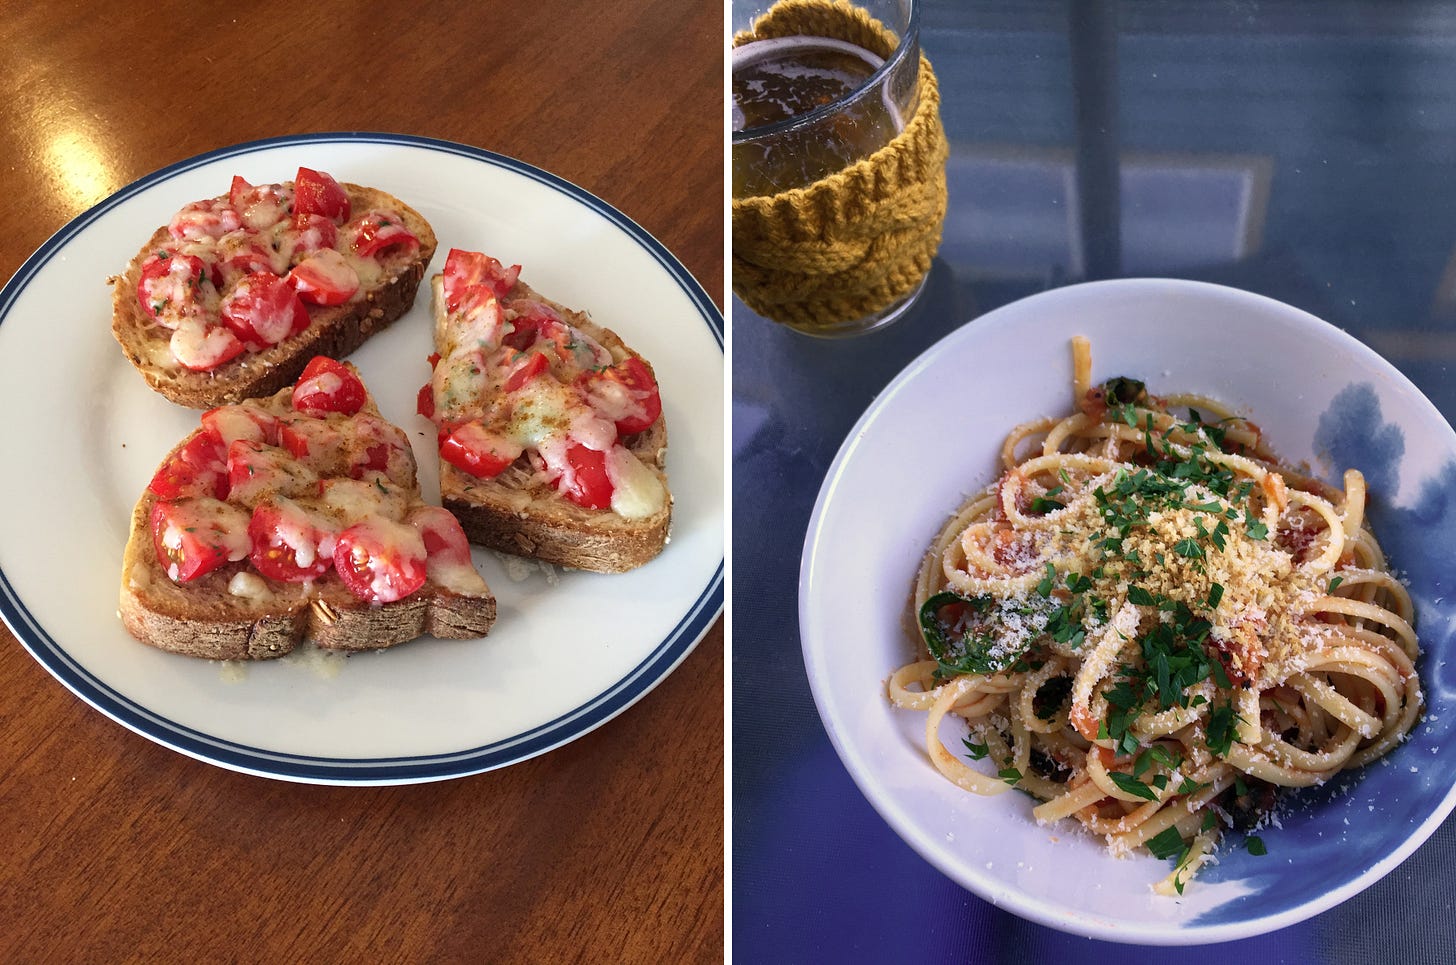 left image: toasted pieces of grainy bread covered in melted white cheddar and chopped small tomatoes. right image: a bowl of pasta in tomato sauce with a dusting of parmesan, parsley, and breadcrumbs on top.